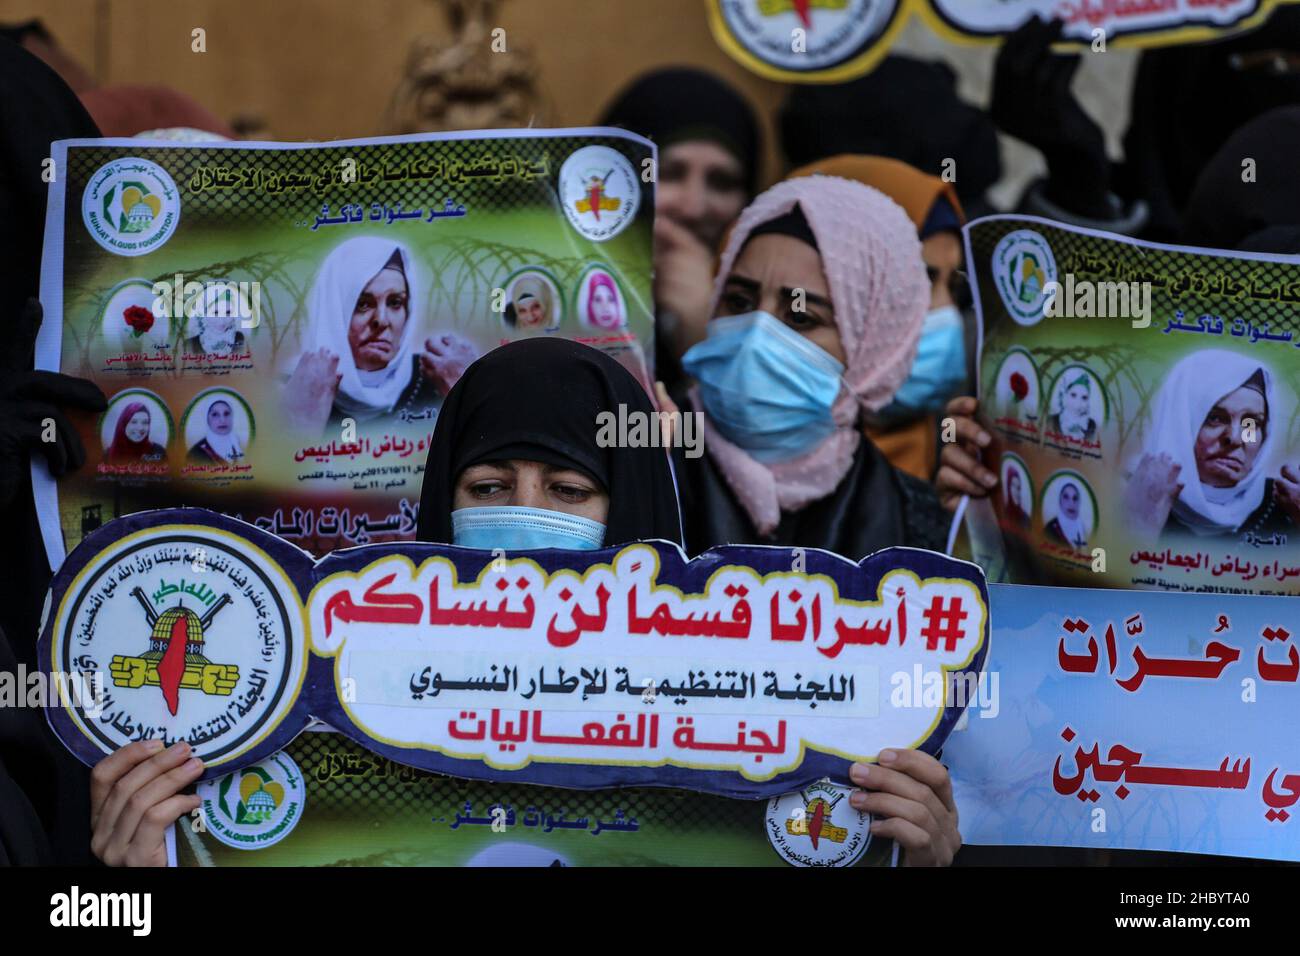 Palestinian women attend a protest with female Palestinian prisoners held in Israeli jails, outside the Red Cross office in Gaza city, on Dec 22, 2021 Stock Photo